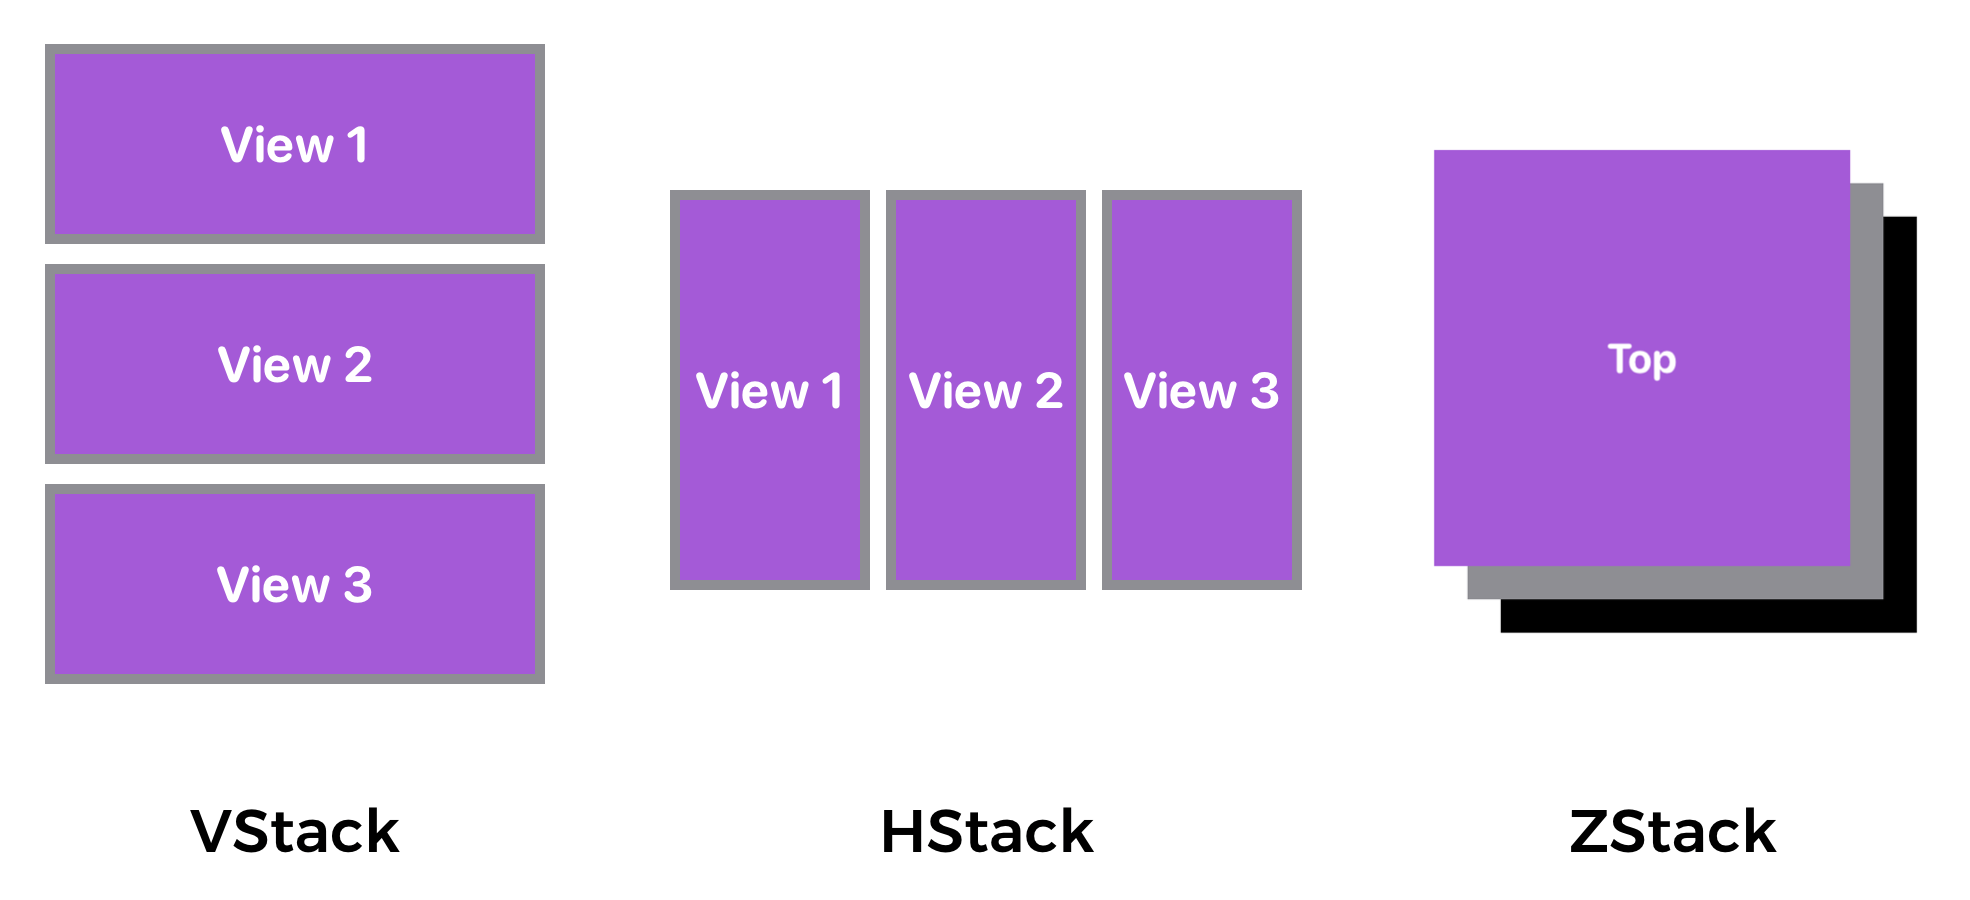 Figure 4-1. Different types of stack view